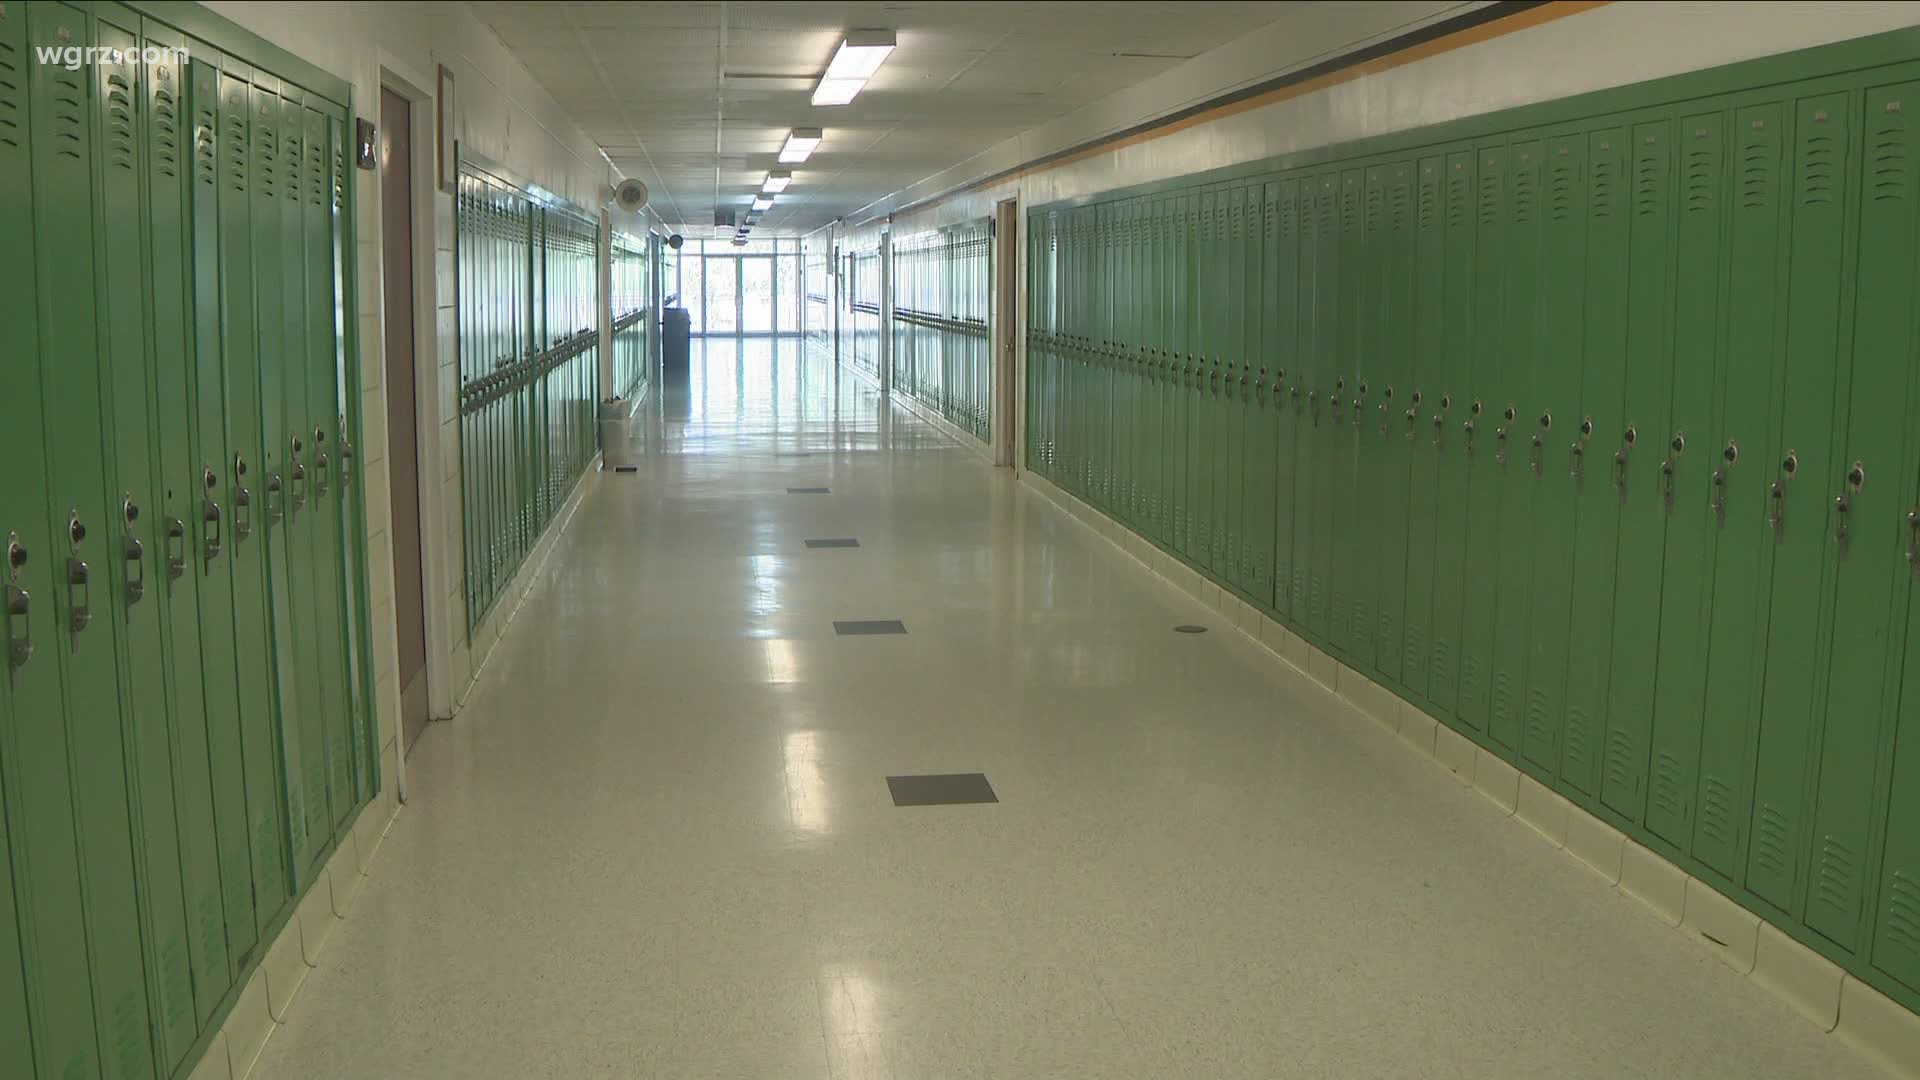 Inside tour of Cardinal O'Hara school ahead of reopening